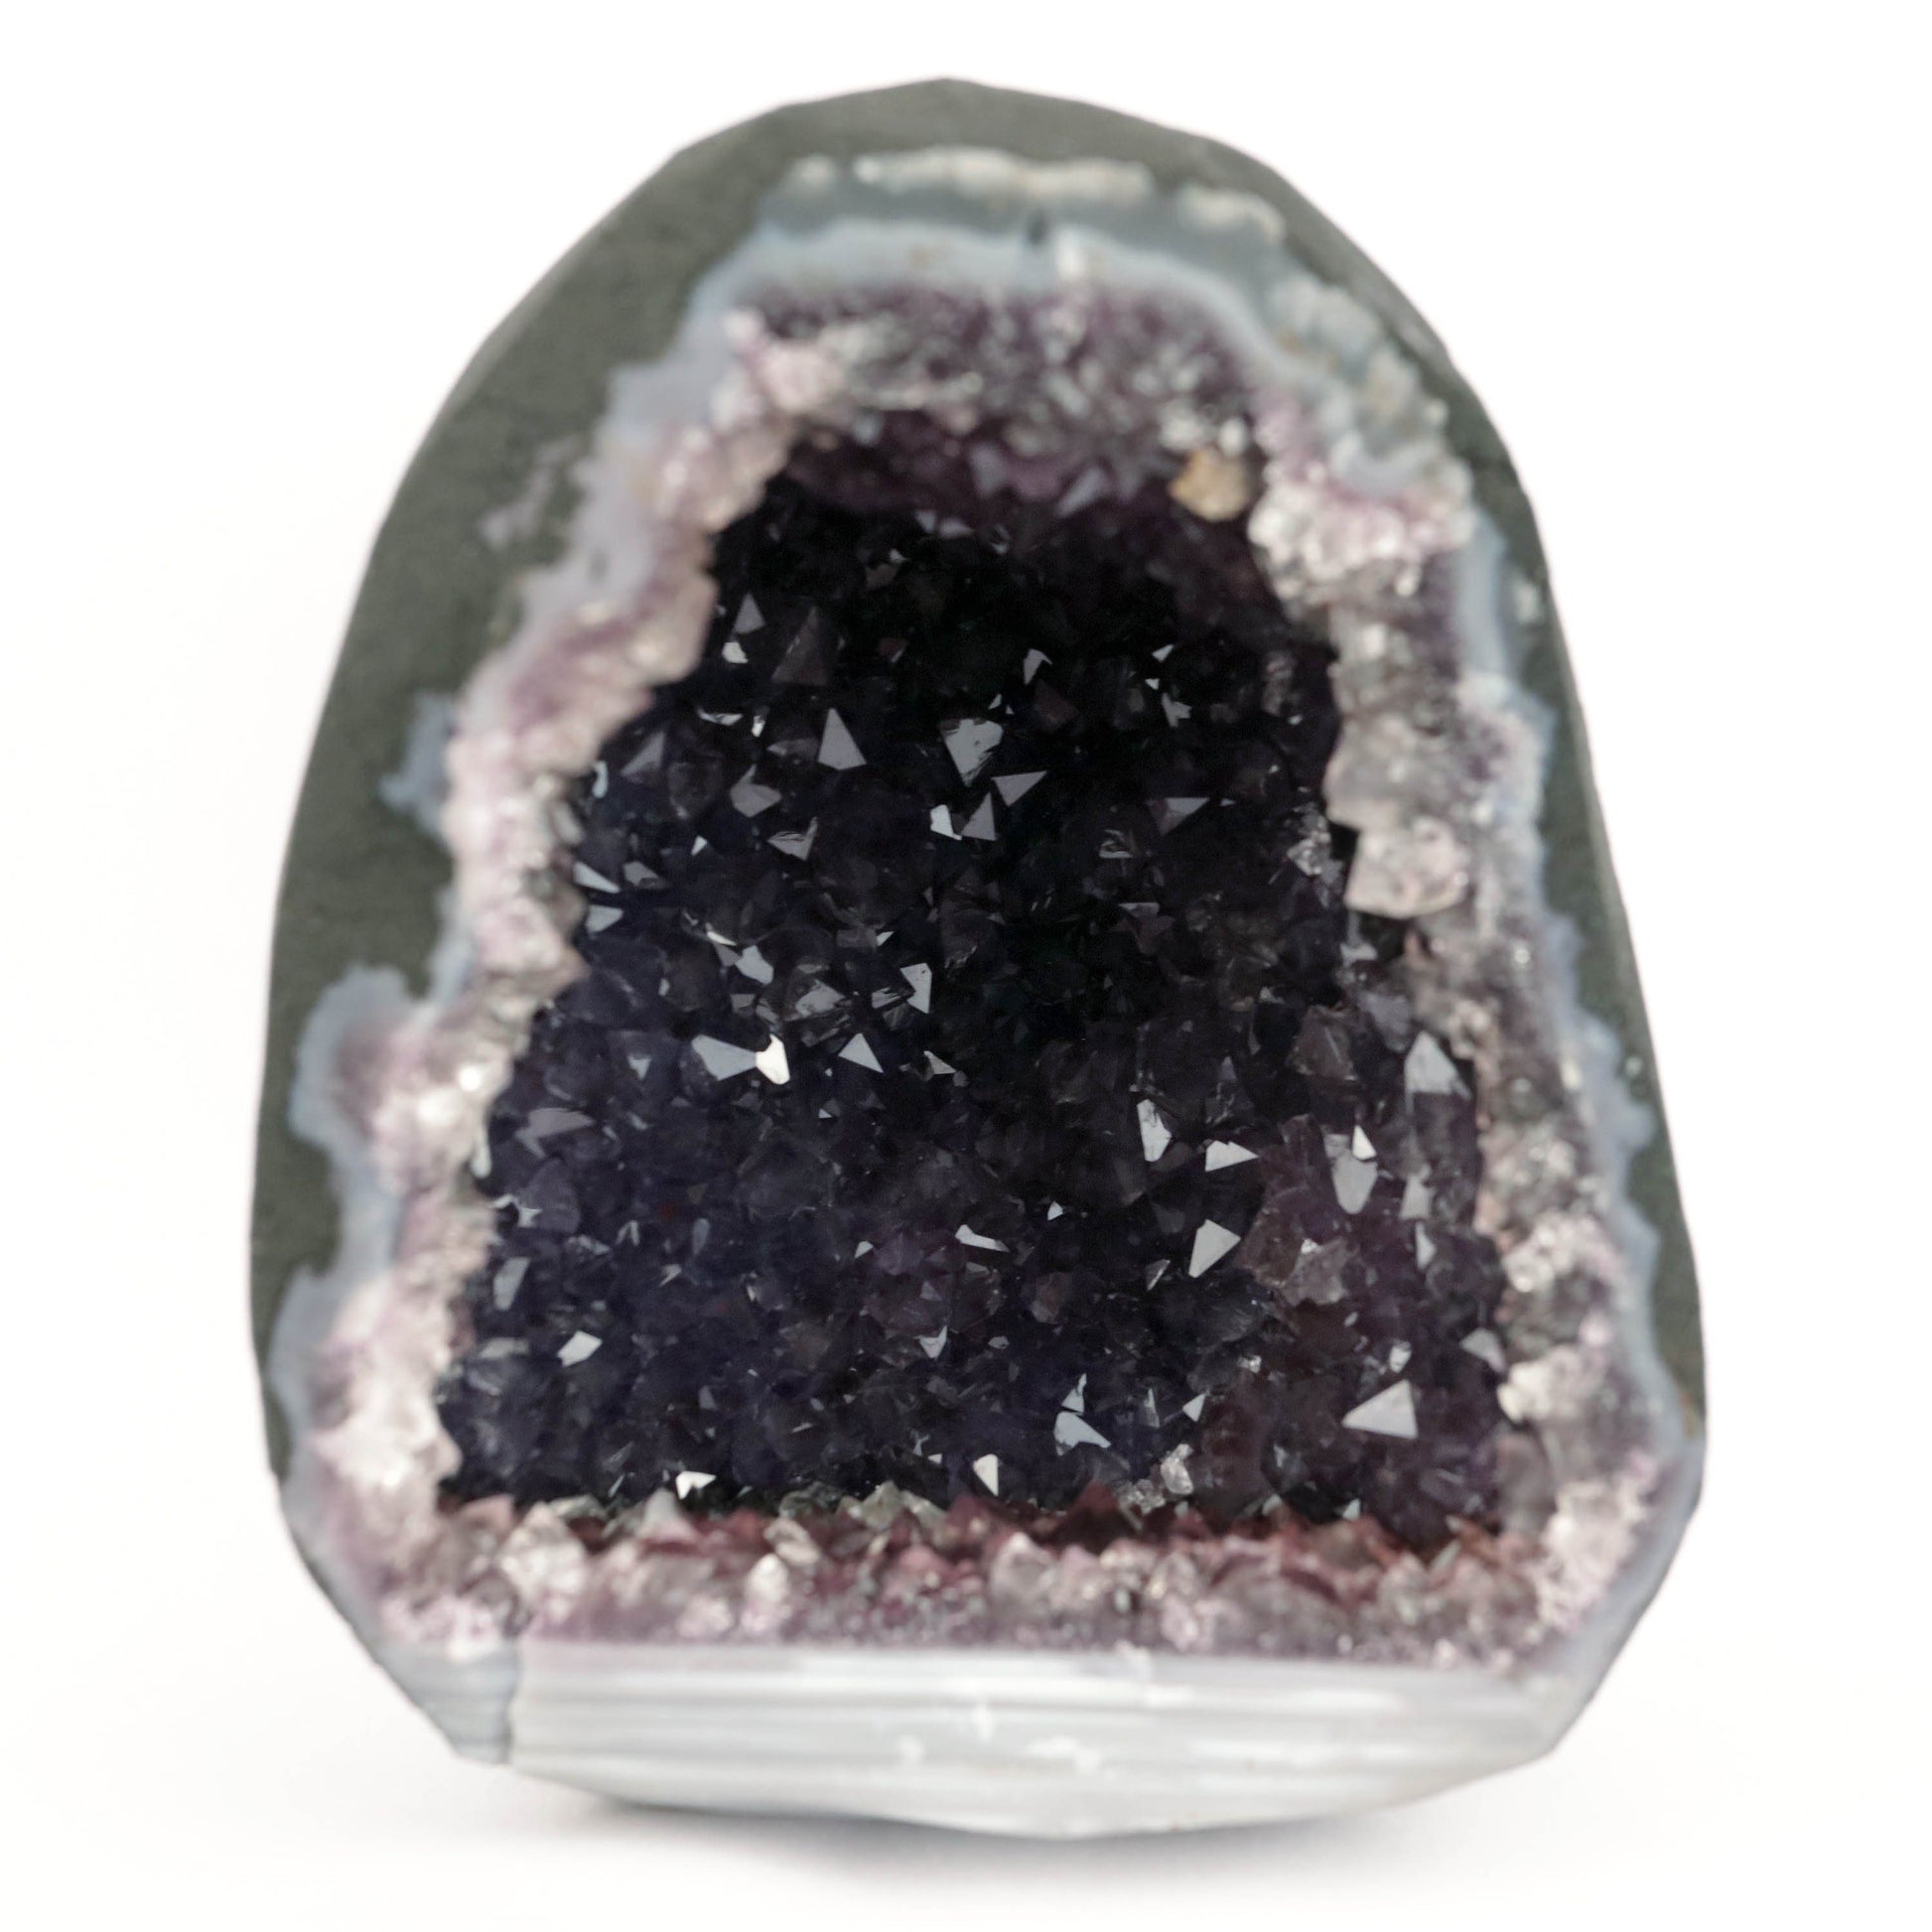 Sparkling Purple Amethyst Geode Natural Mineral Specimen # B 4636  https://www.superbminerals.us/products/sparkling-purple-amethyst-geode-natural-mineral-specimen-b-4636  Features: Large Amethyst Cluster with rich purple gems. Stunning Amethyst has a vibrant, rich hue and a brilliant sparkle. Besides its colour and brilliance, I chose this piece for its unusual and asymmetrical form. In a sea of identical-looking geodes, it stood out. I would recommend this as a decorative item. 